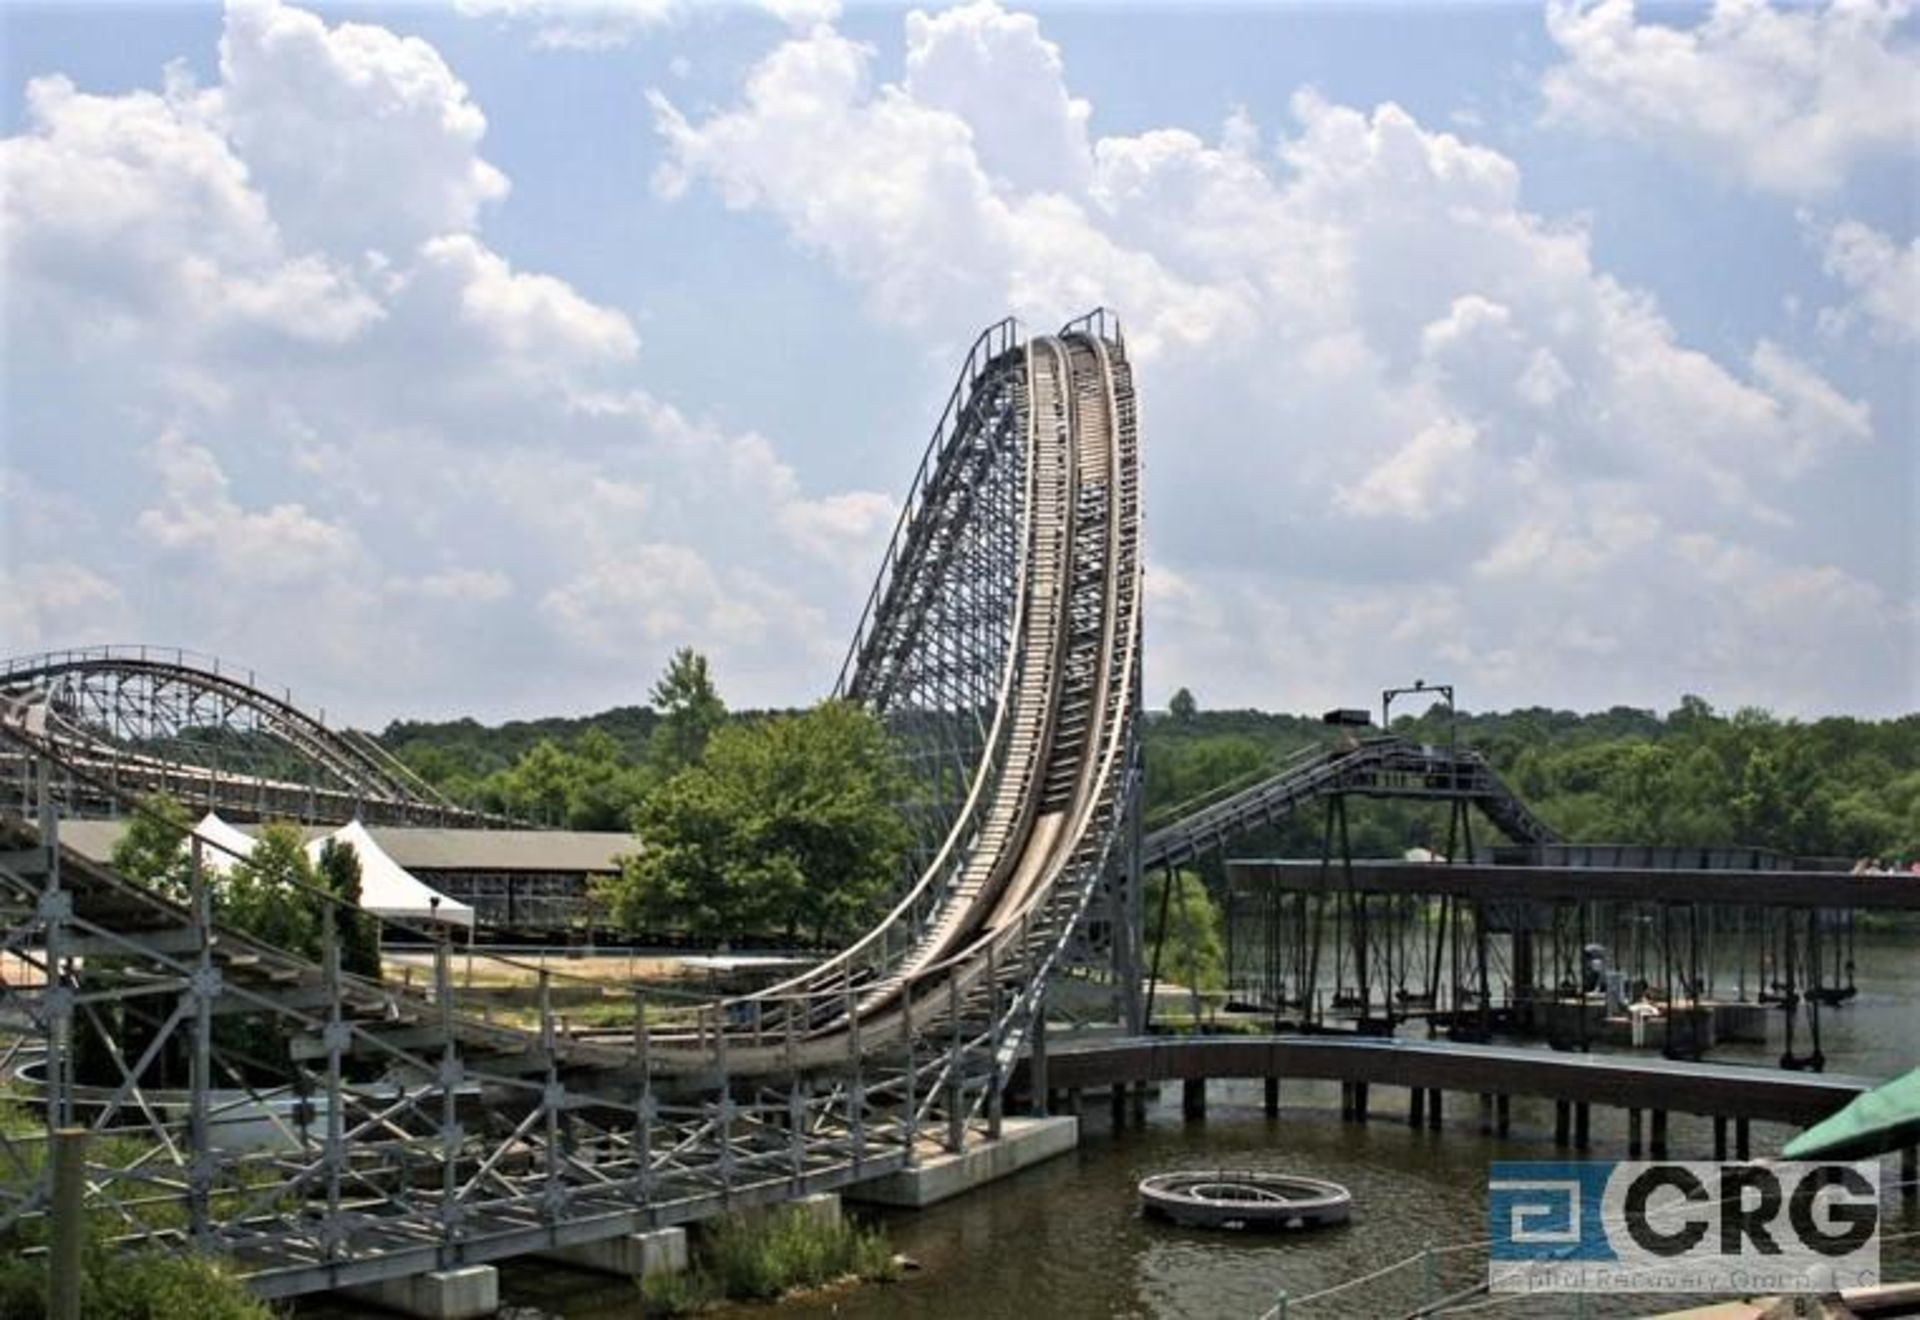 Hell Cat wood deck roller coaster, all galvanized steel structure frame, new in 2005, including - Image 2 of 9